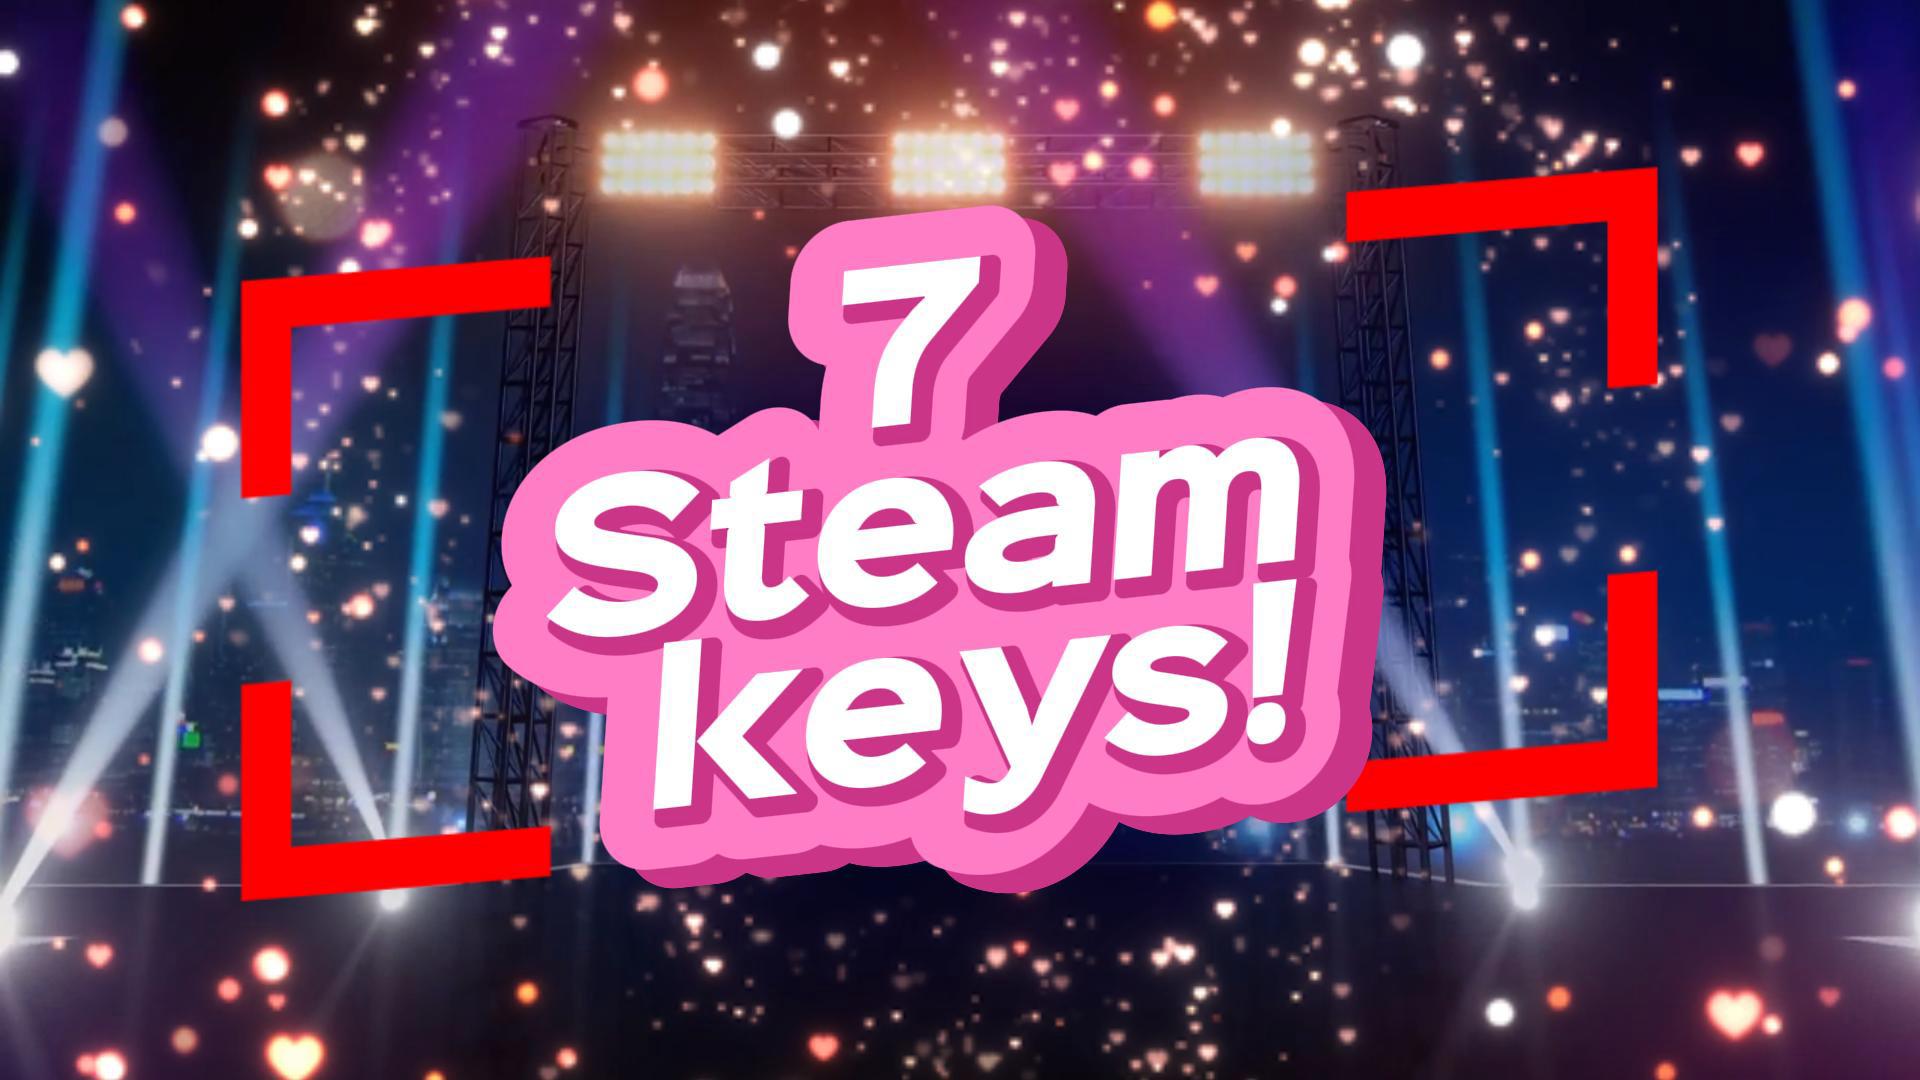 House of Maids: Steam keys GIVEAWAY! - House of Maids by DarkCube